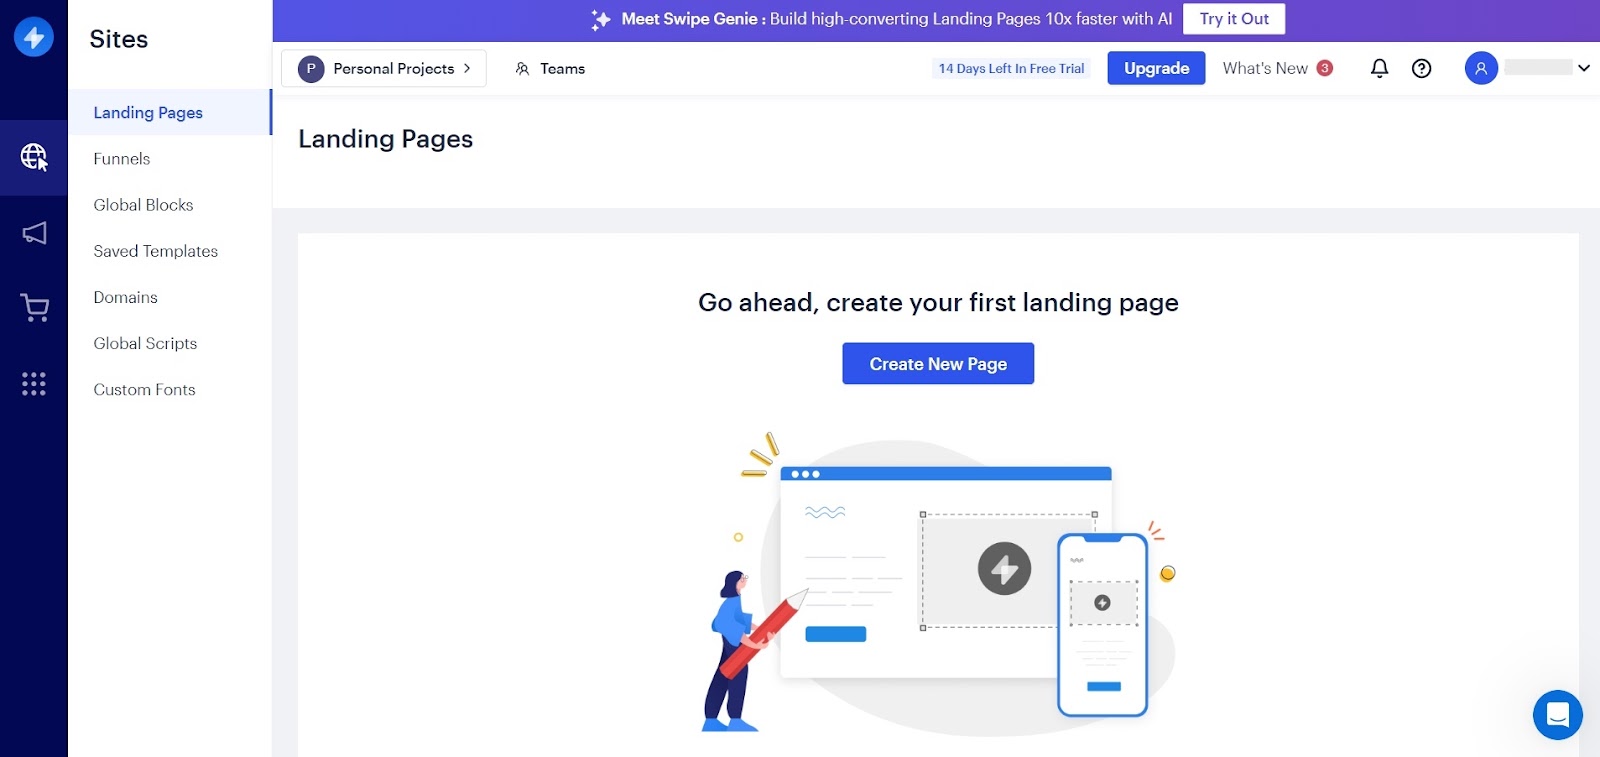 Swipe Pages landing page builder interface with a menu bar on the left and the "Create New Page" button in the center